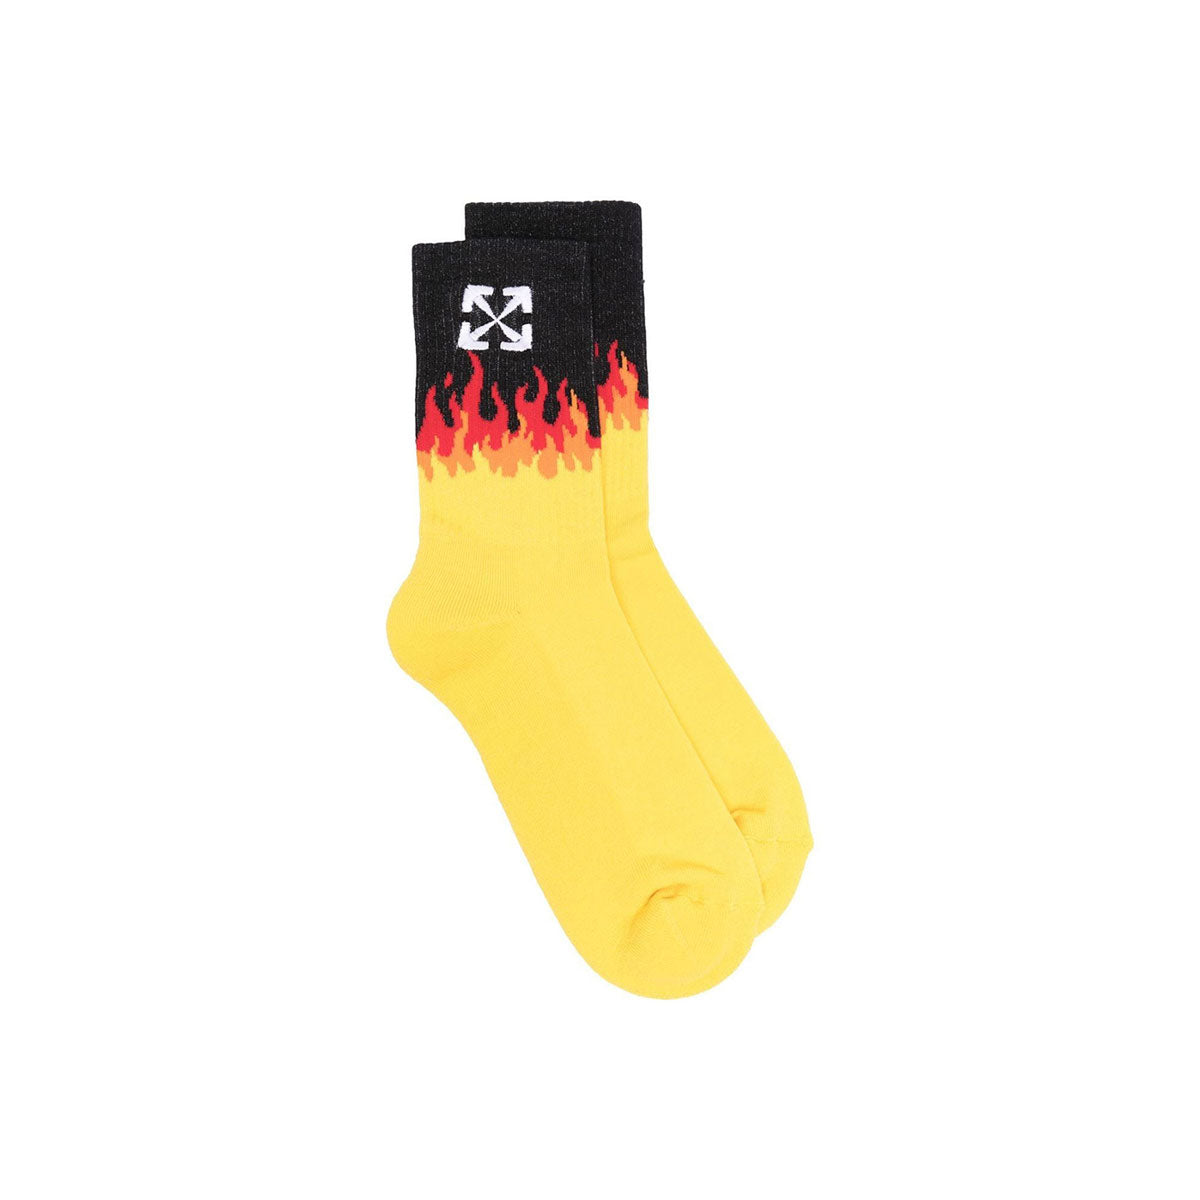 FLAMES SOCKS - Why are you here?